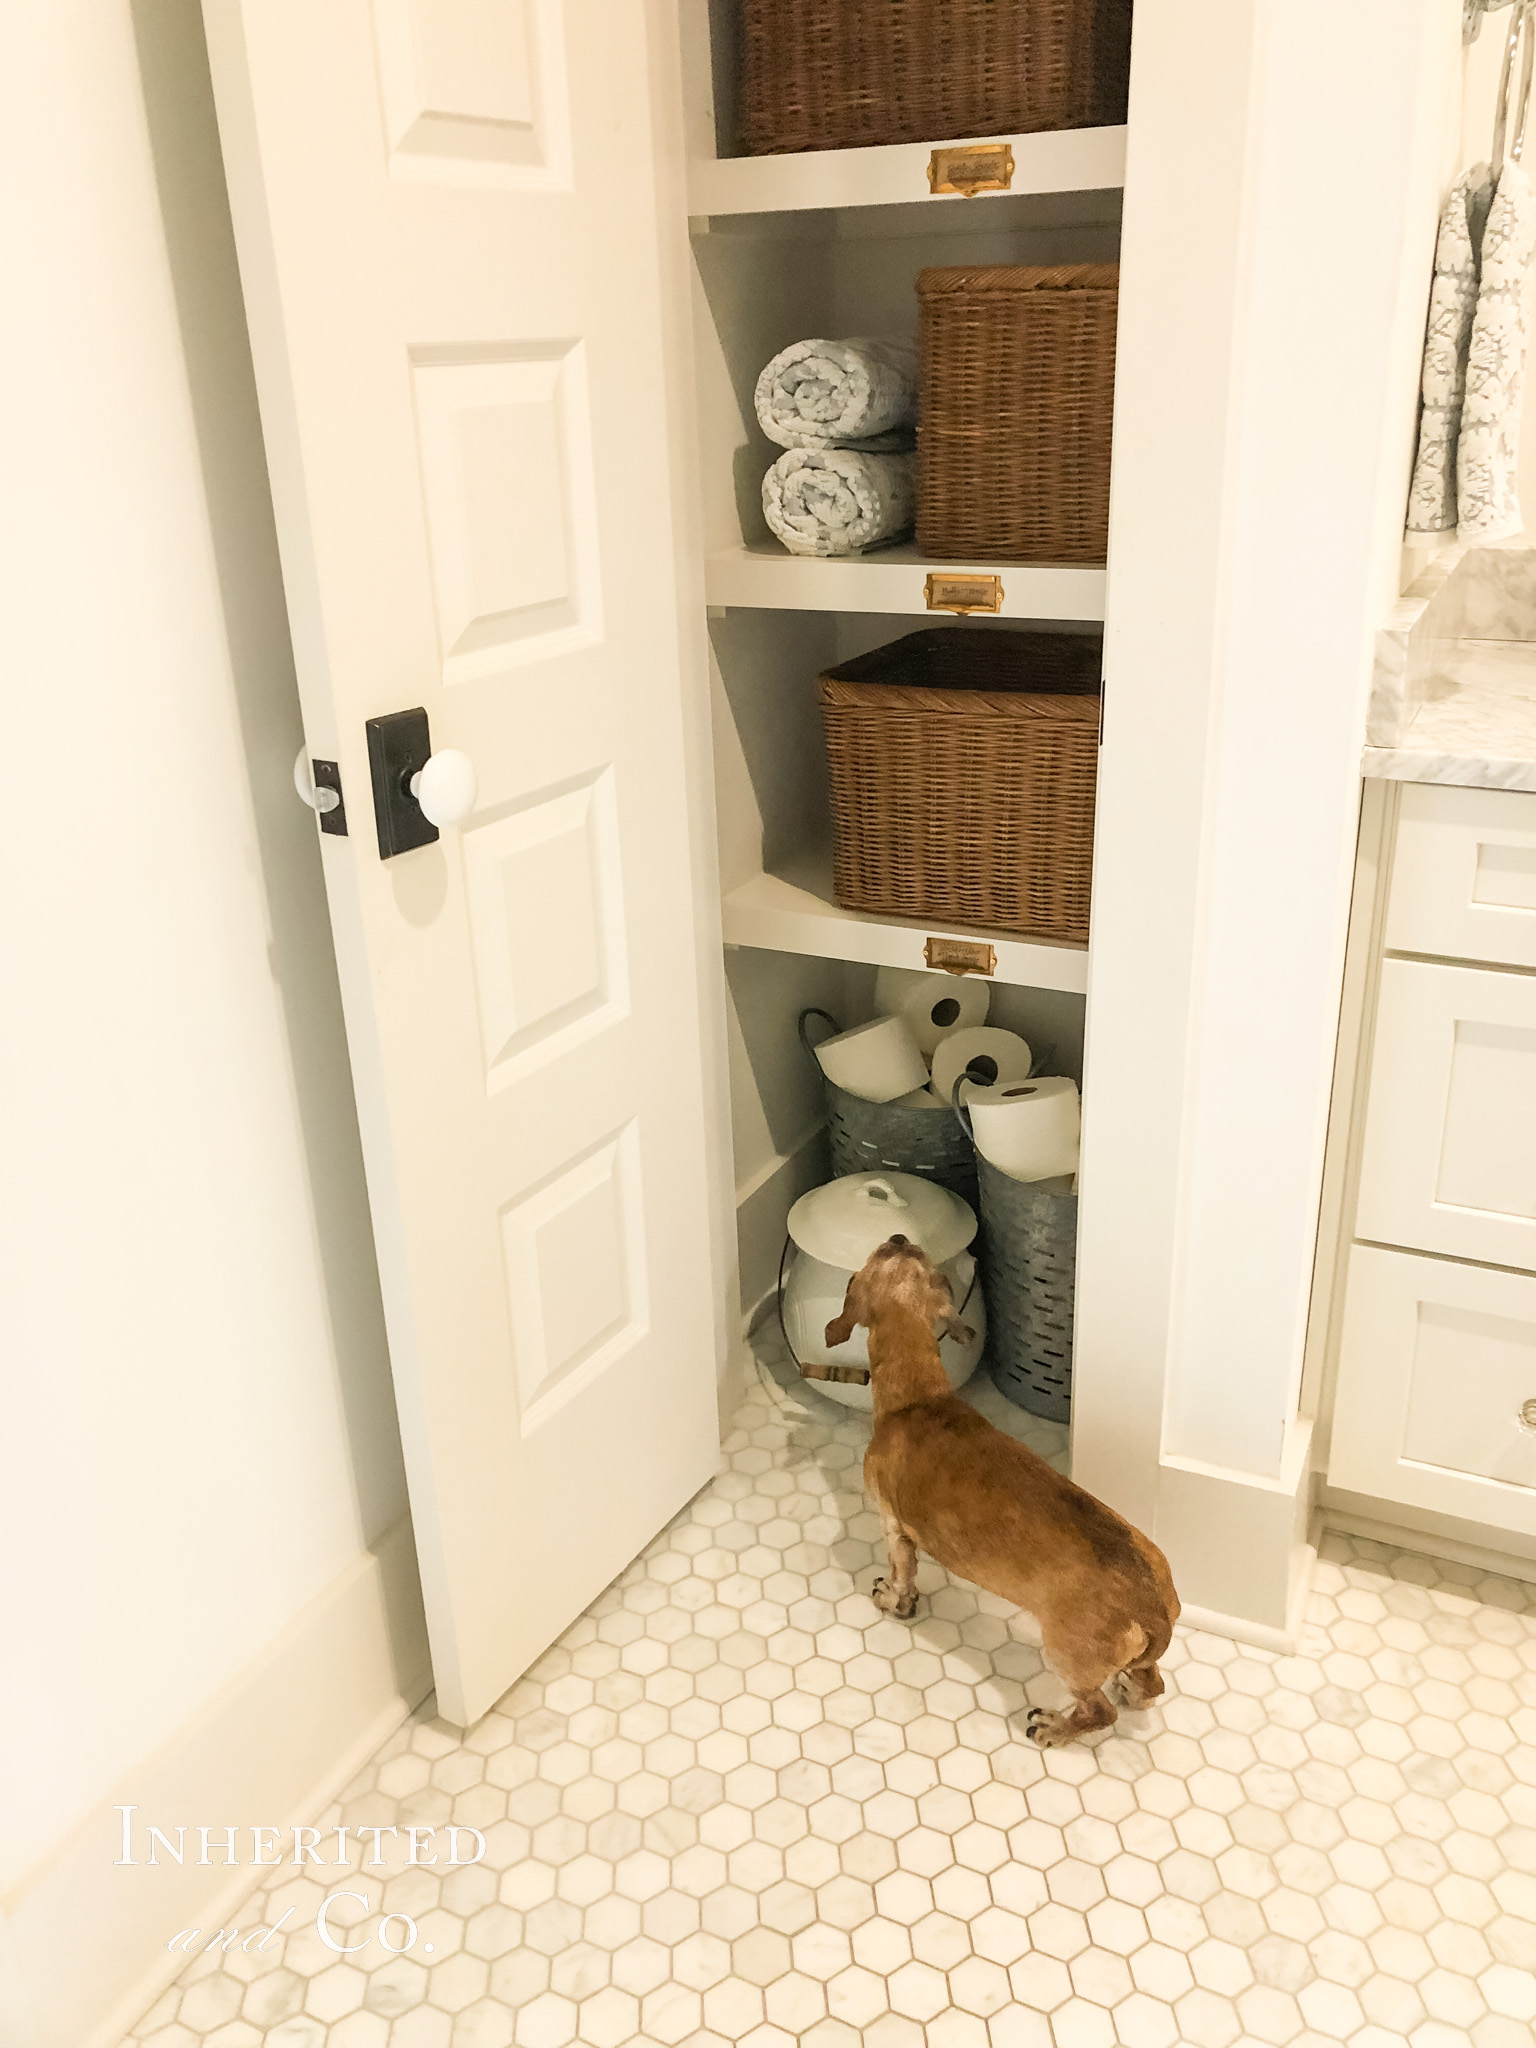 Dachshund standing in front of an organized linen closet